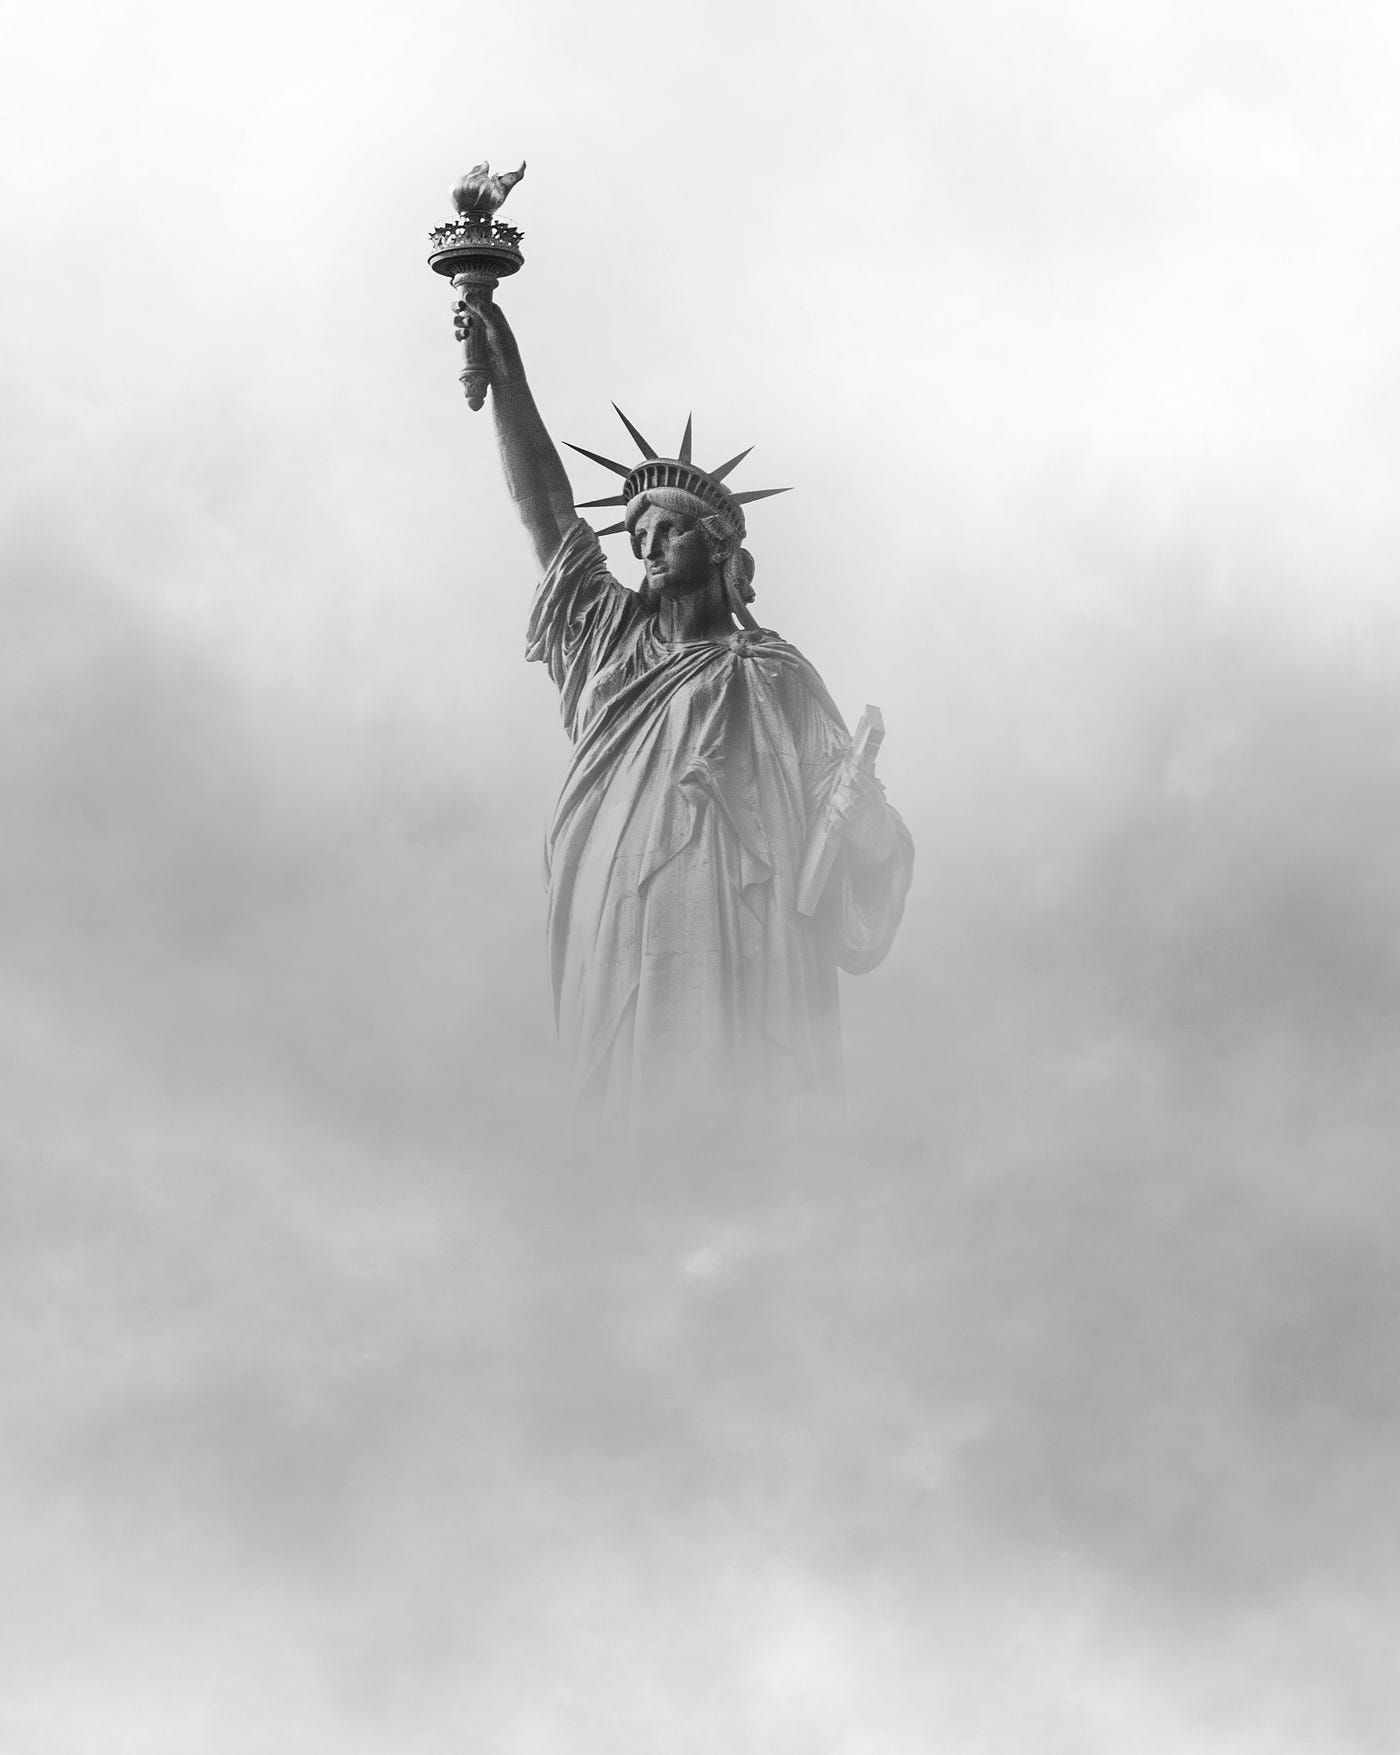 A black and white image of the Statue of Liberty emerging from the fog of dictators.